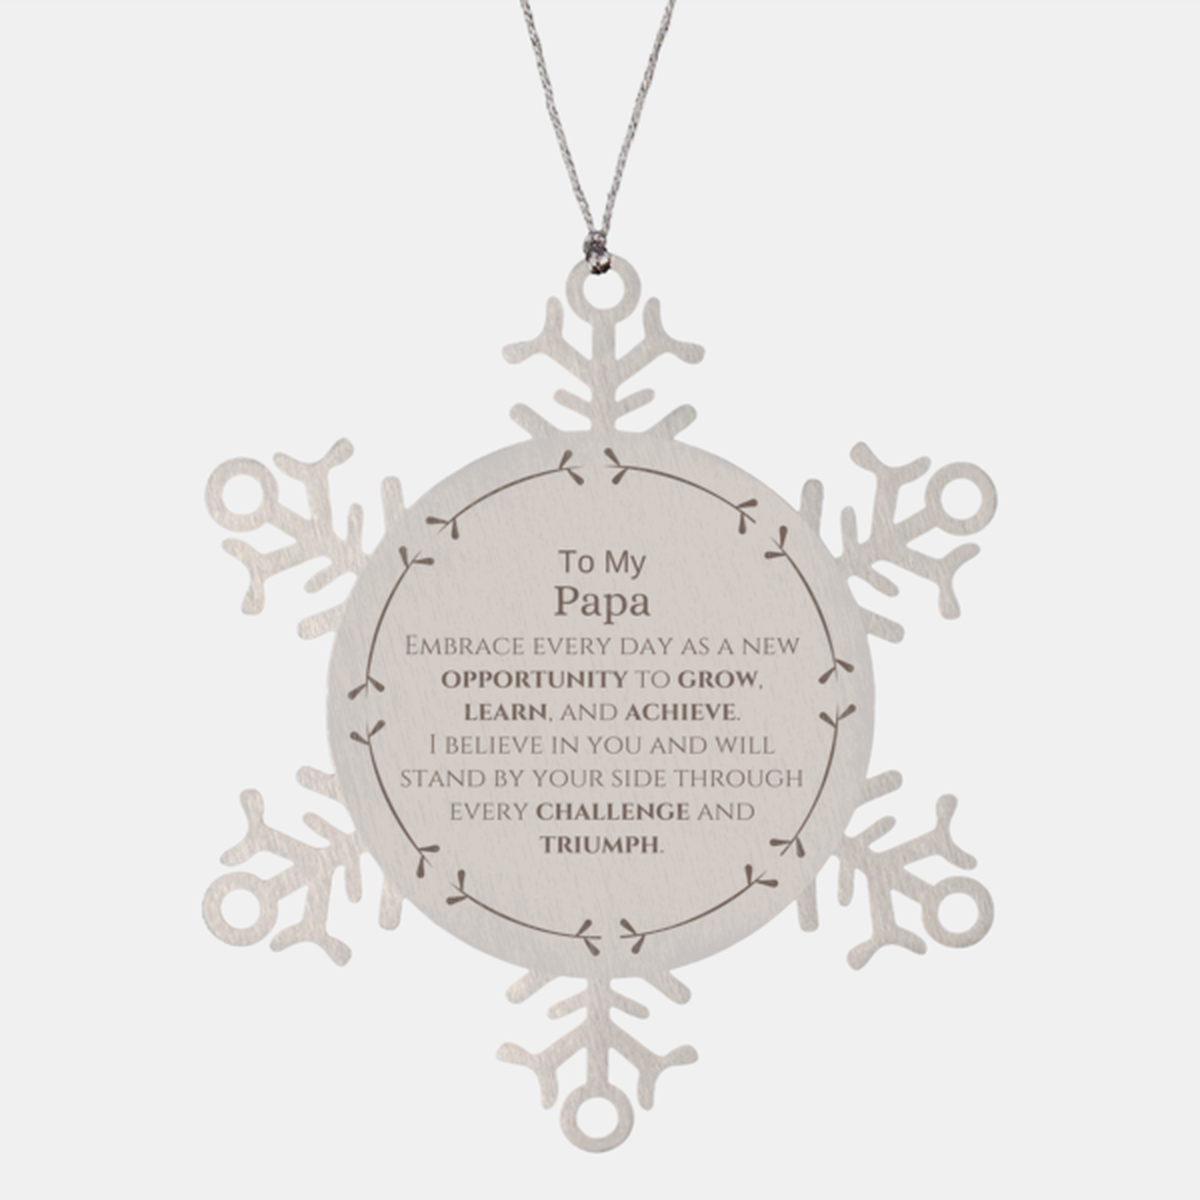 To My Papa Gifts, I believe in you and will stand by your side, Inspirational Snowflake Ornament For Papa, Birthday Christmas Motivational Papa Gifts